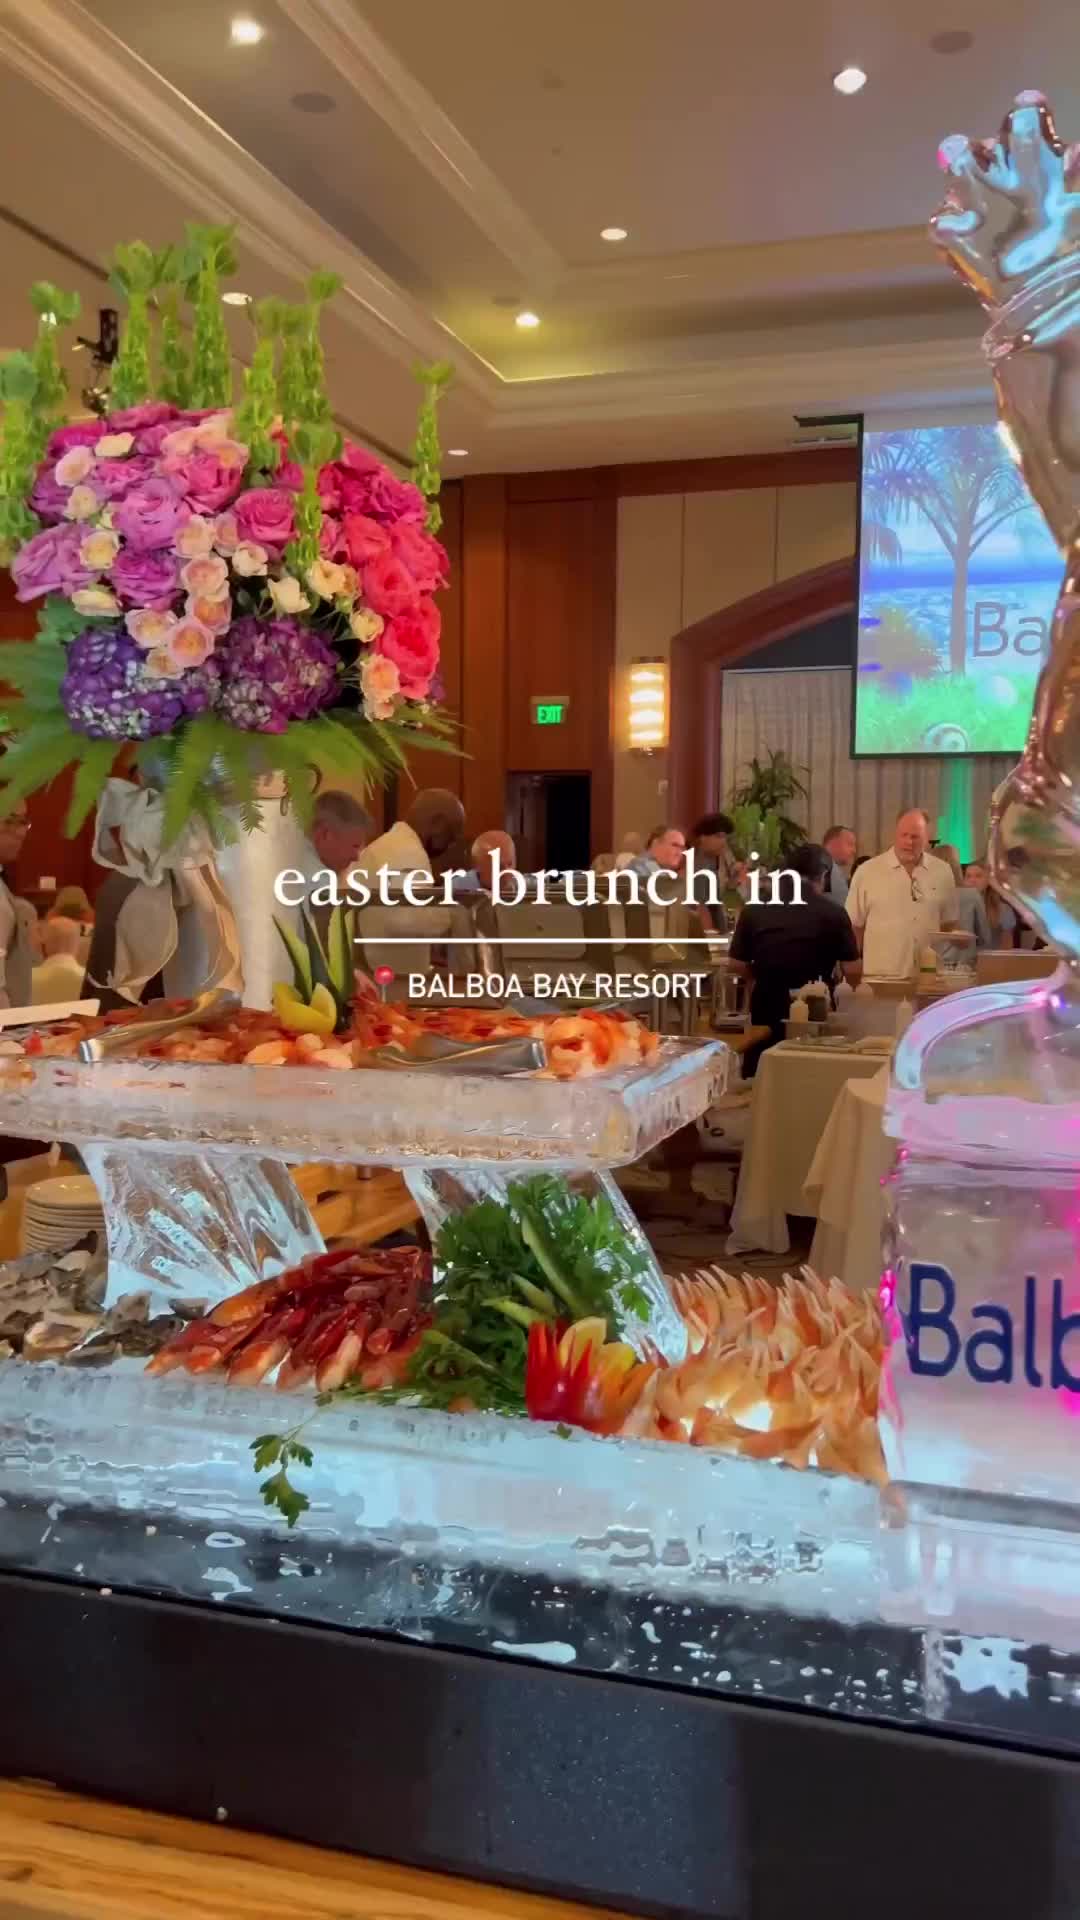 Easter Brunch at Balboa Bay Resort with Family